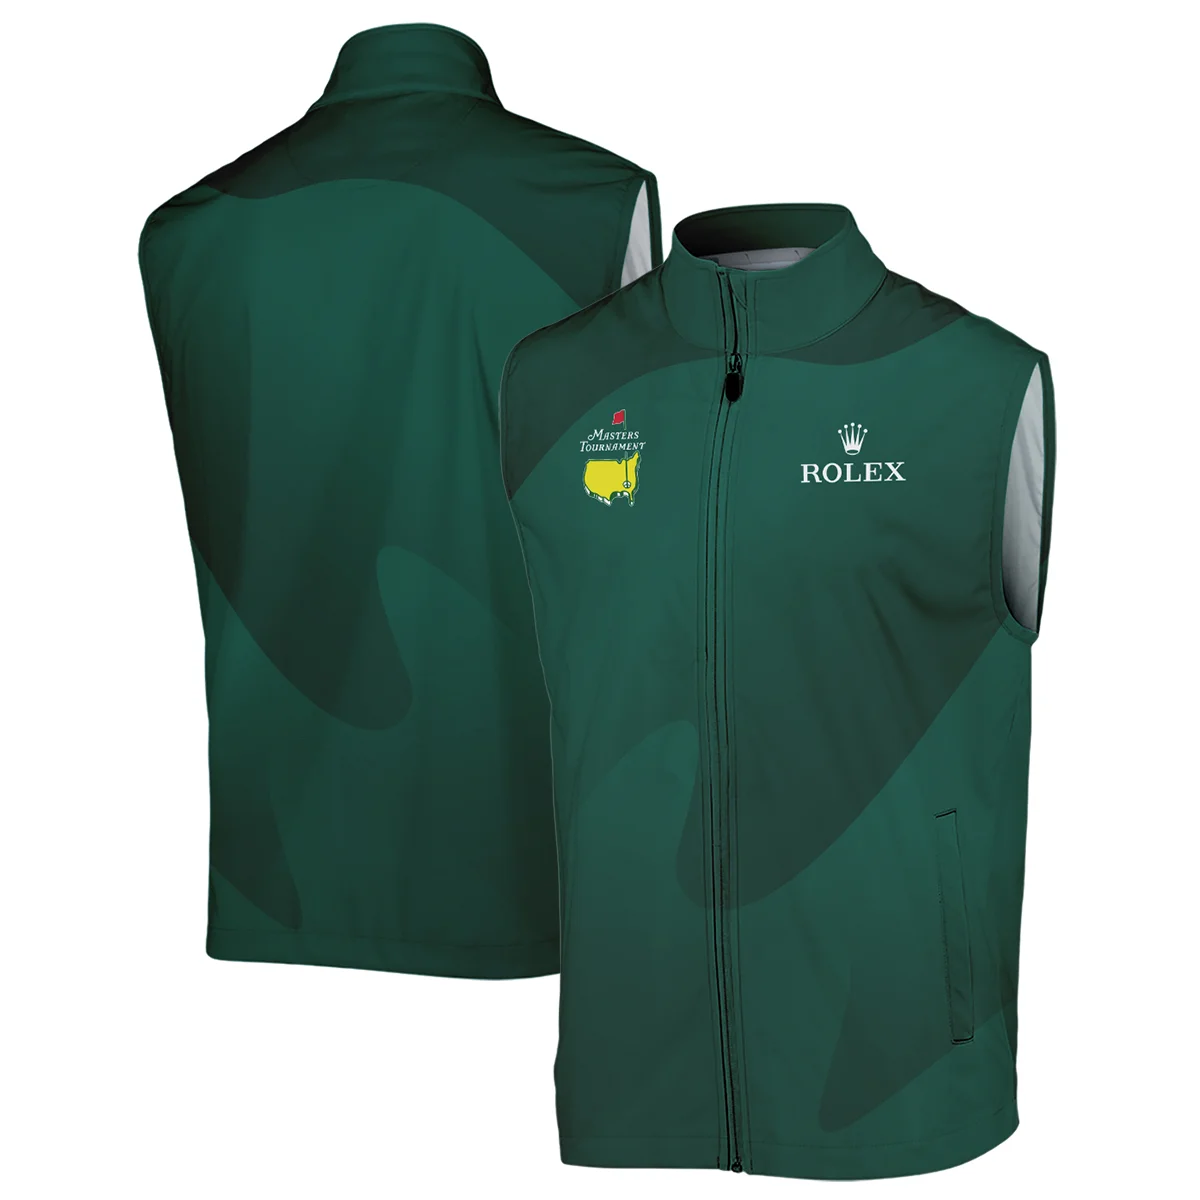 Golf For Sublimation Sport Green Masters Tournament Rolex Bomber Jacket Style Classic Bomber Jacket